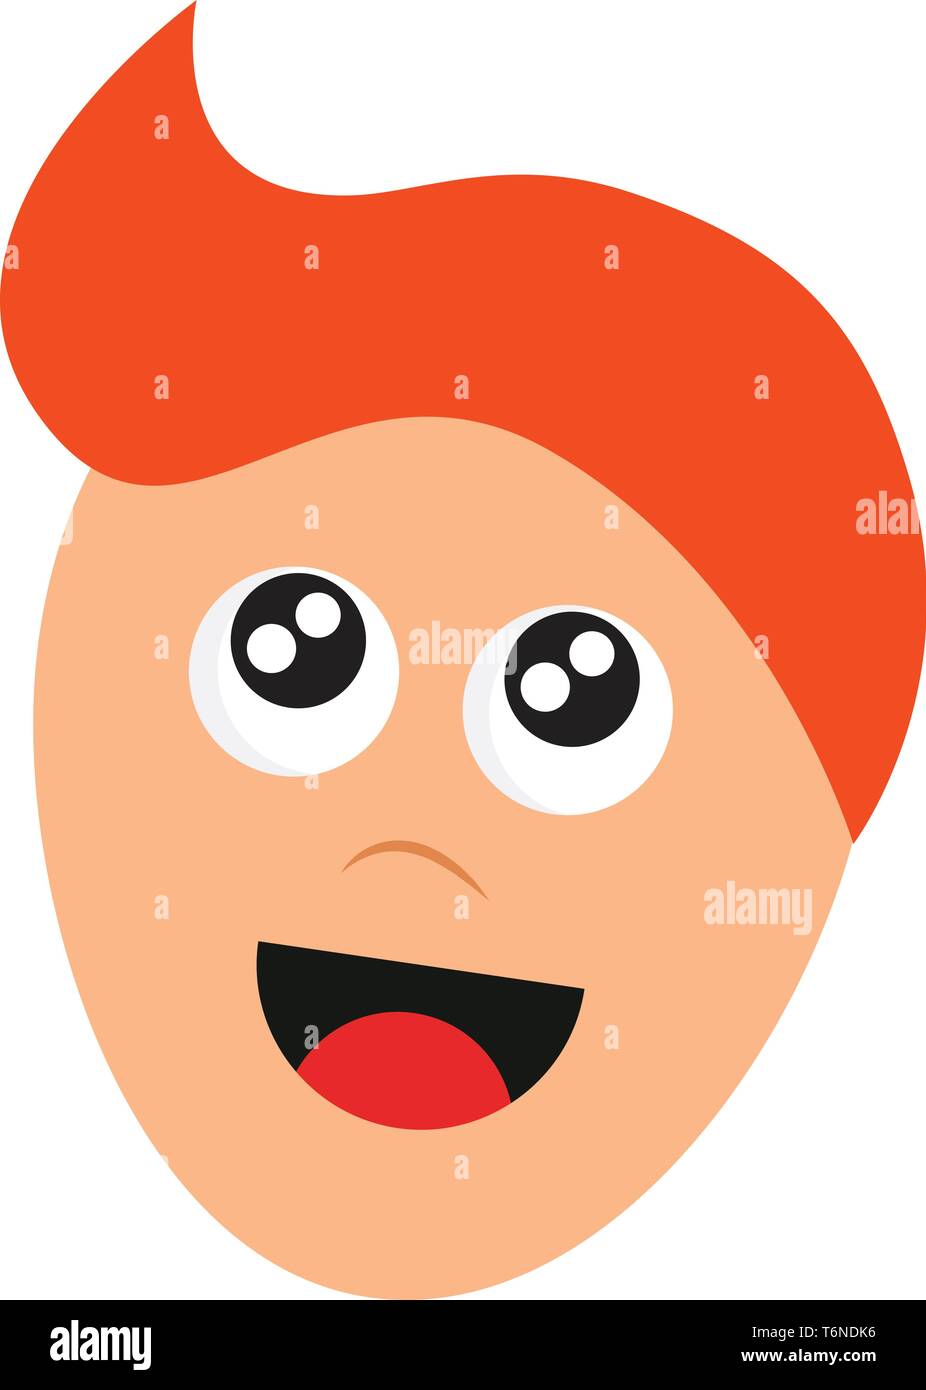 Cartoon face of a boy with orange hair and red tongue exposed while laughing  vector  color drawing or illustration Stock Vector